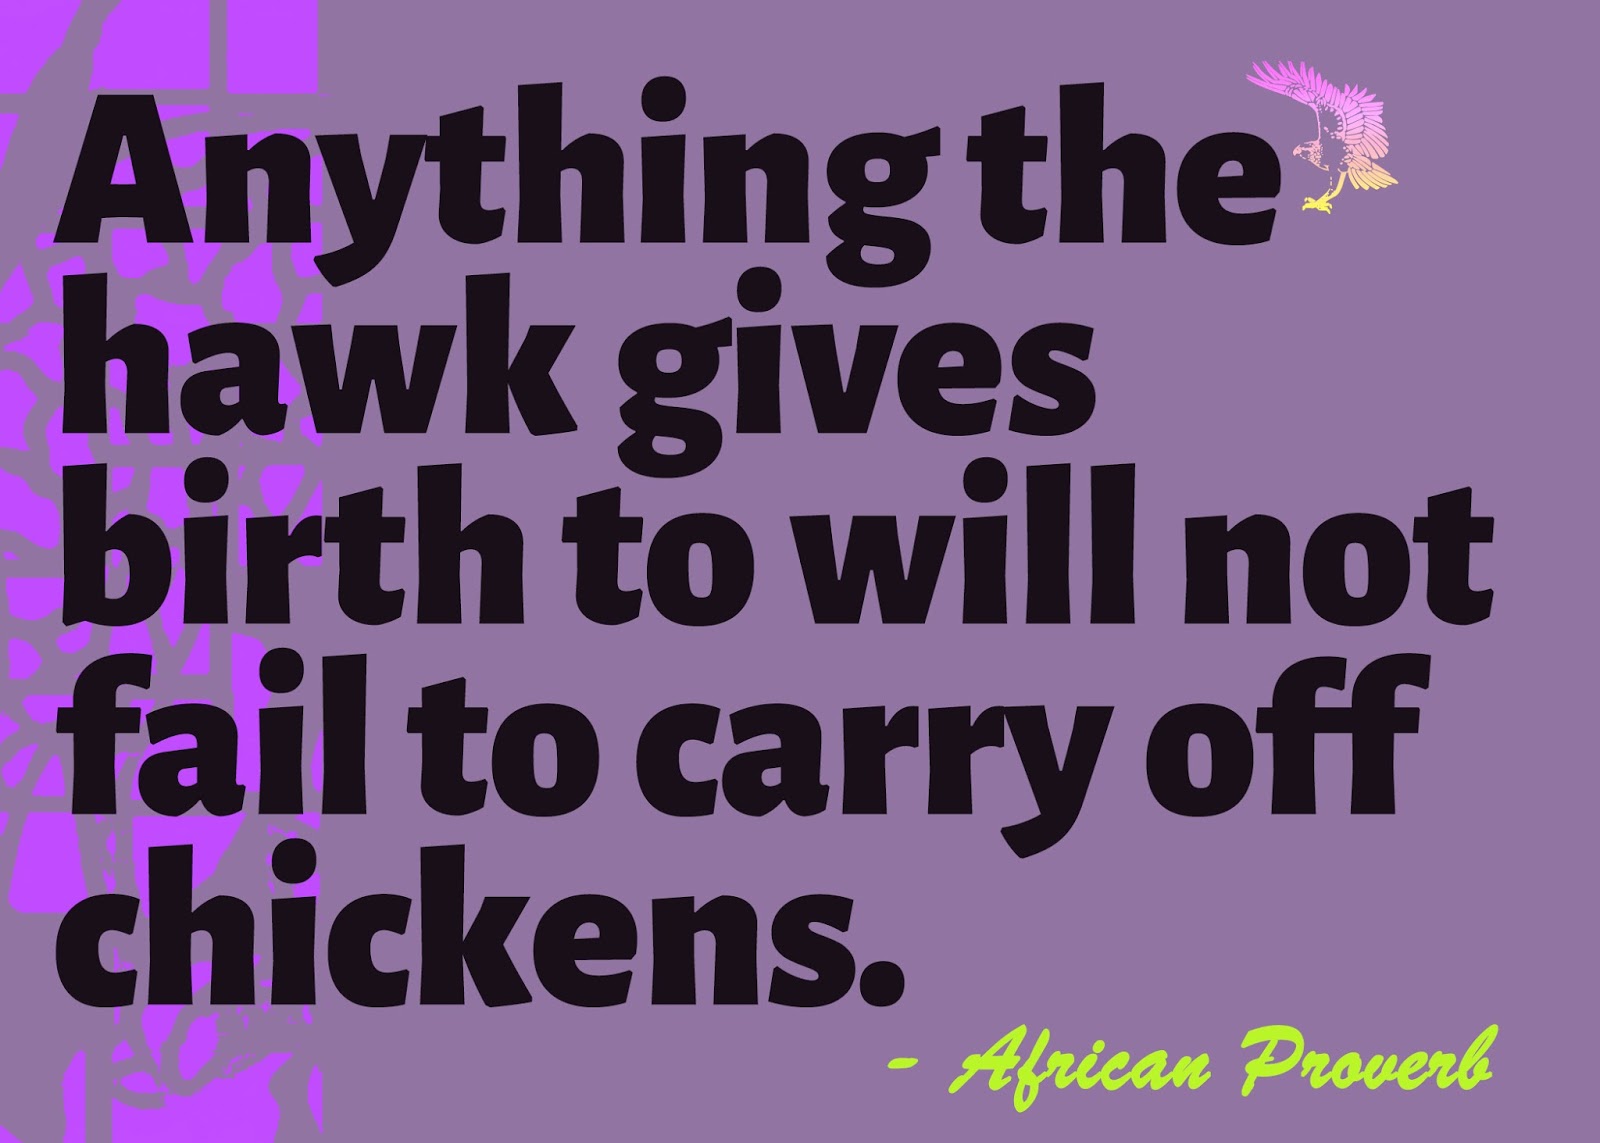 African proverbs quotes and sayings about cunning deceit and lies